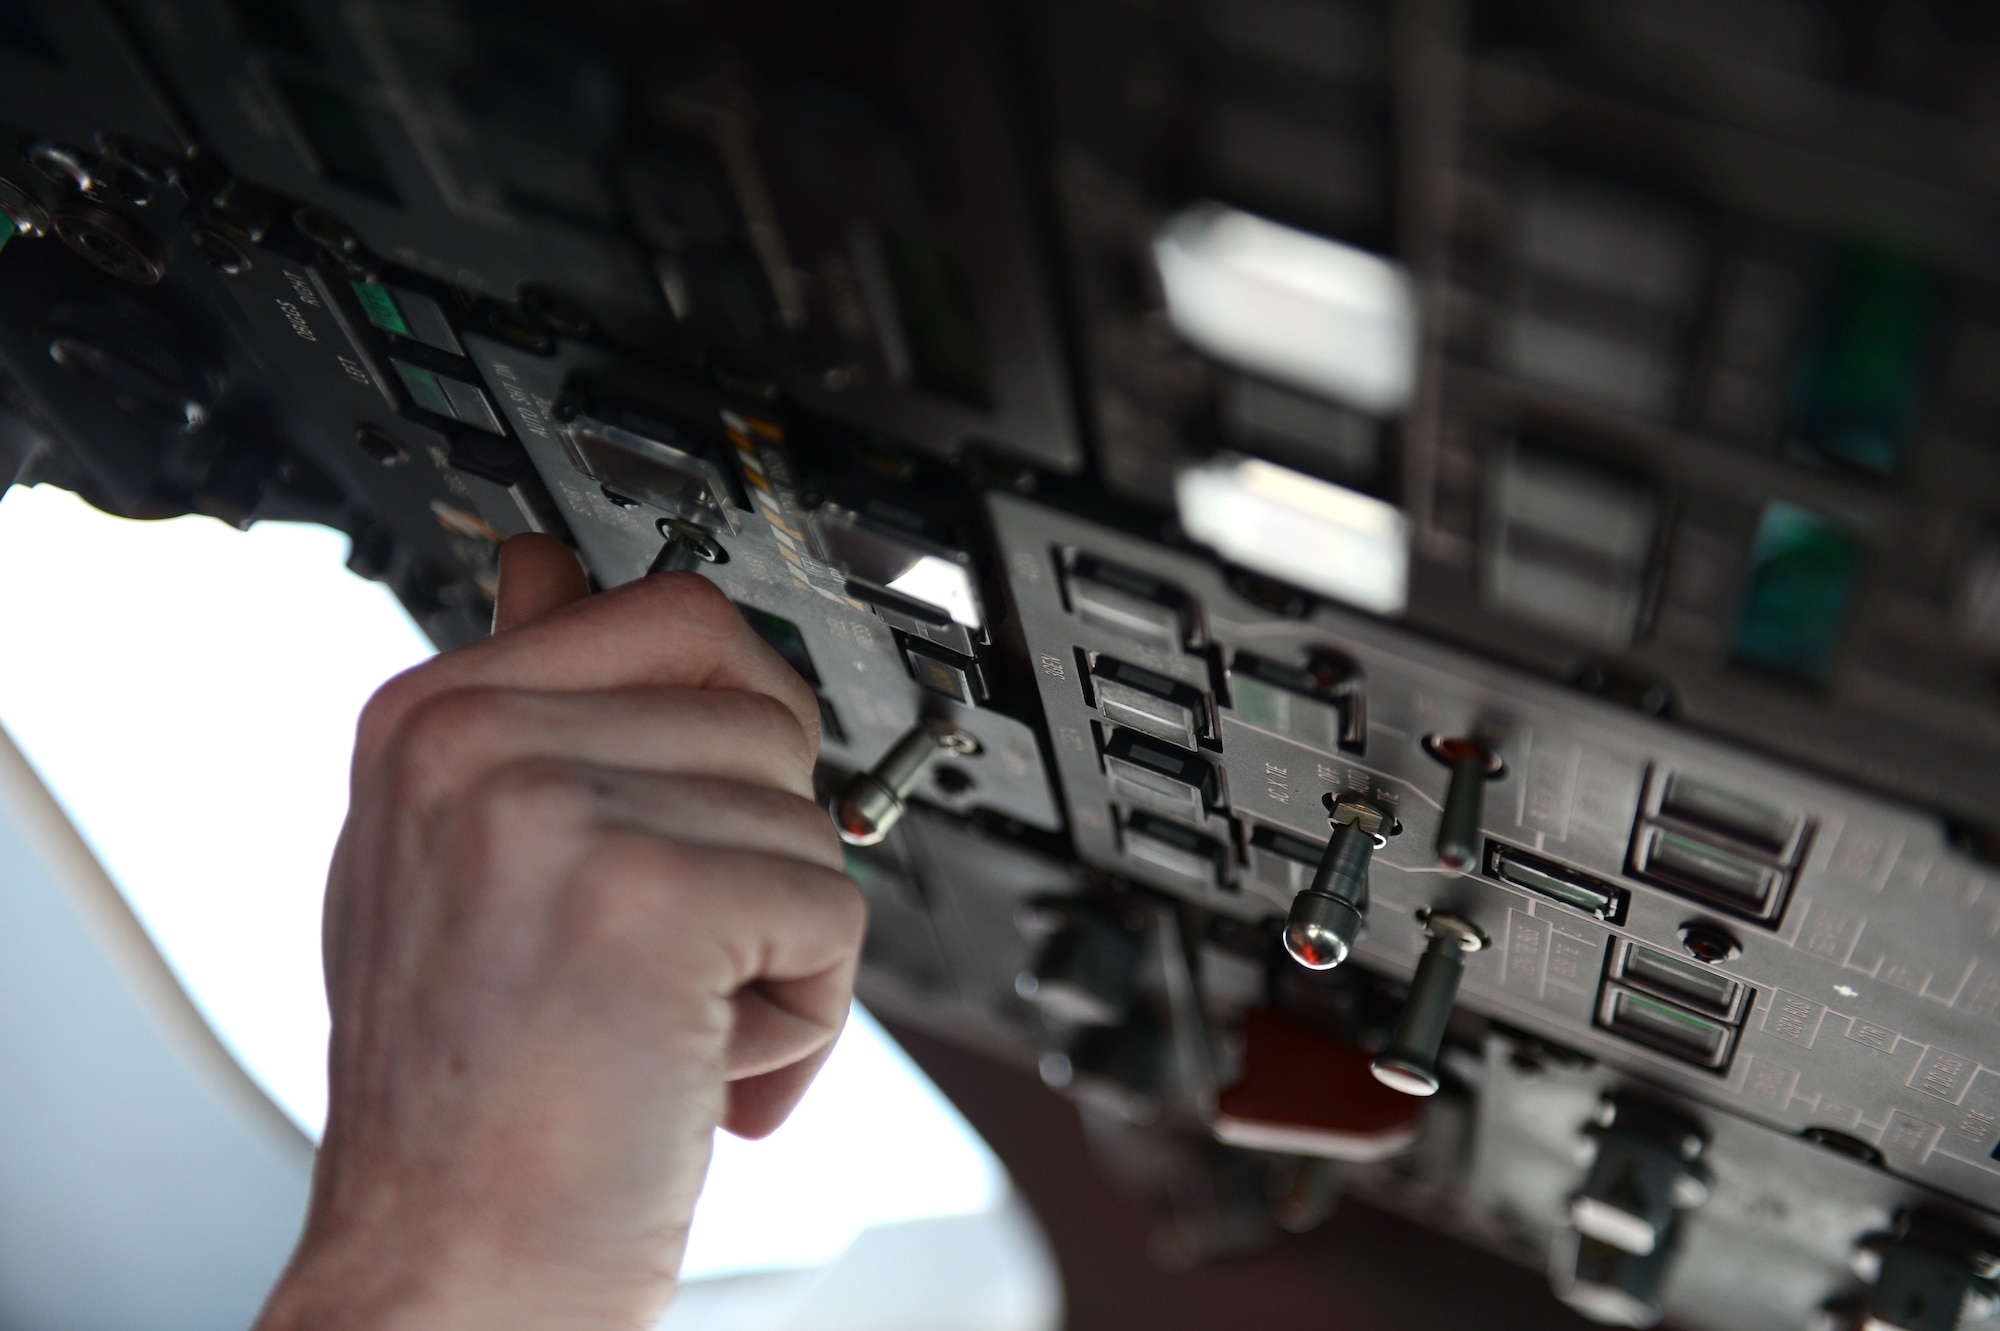 SPANGDAHLEM AIR BASE, Germany – U.S. Air Force Senior Airman Joshua Kujawa, 726th Air Mobility Squadron integrated flight control technician from Toms River, N.J., turns on the auxiliary power unit of a C-17 Globemaster III March 13, 2013. The APU is used to power parts of the aircraft when it is at rest if external power units are not available. (U.S. Air Force photo by Airman 1st Class Gustavo Castillo/Released)